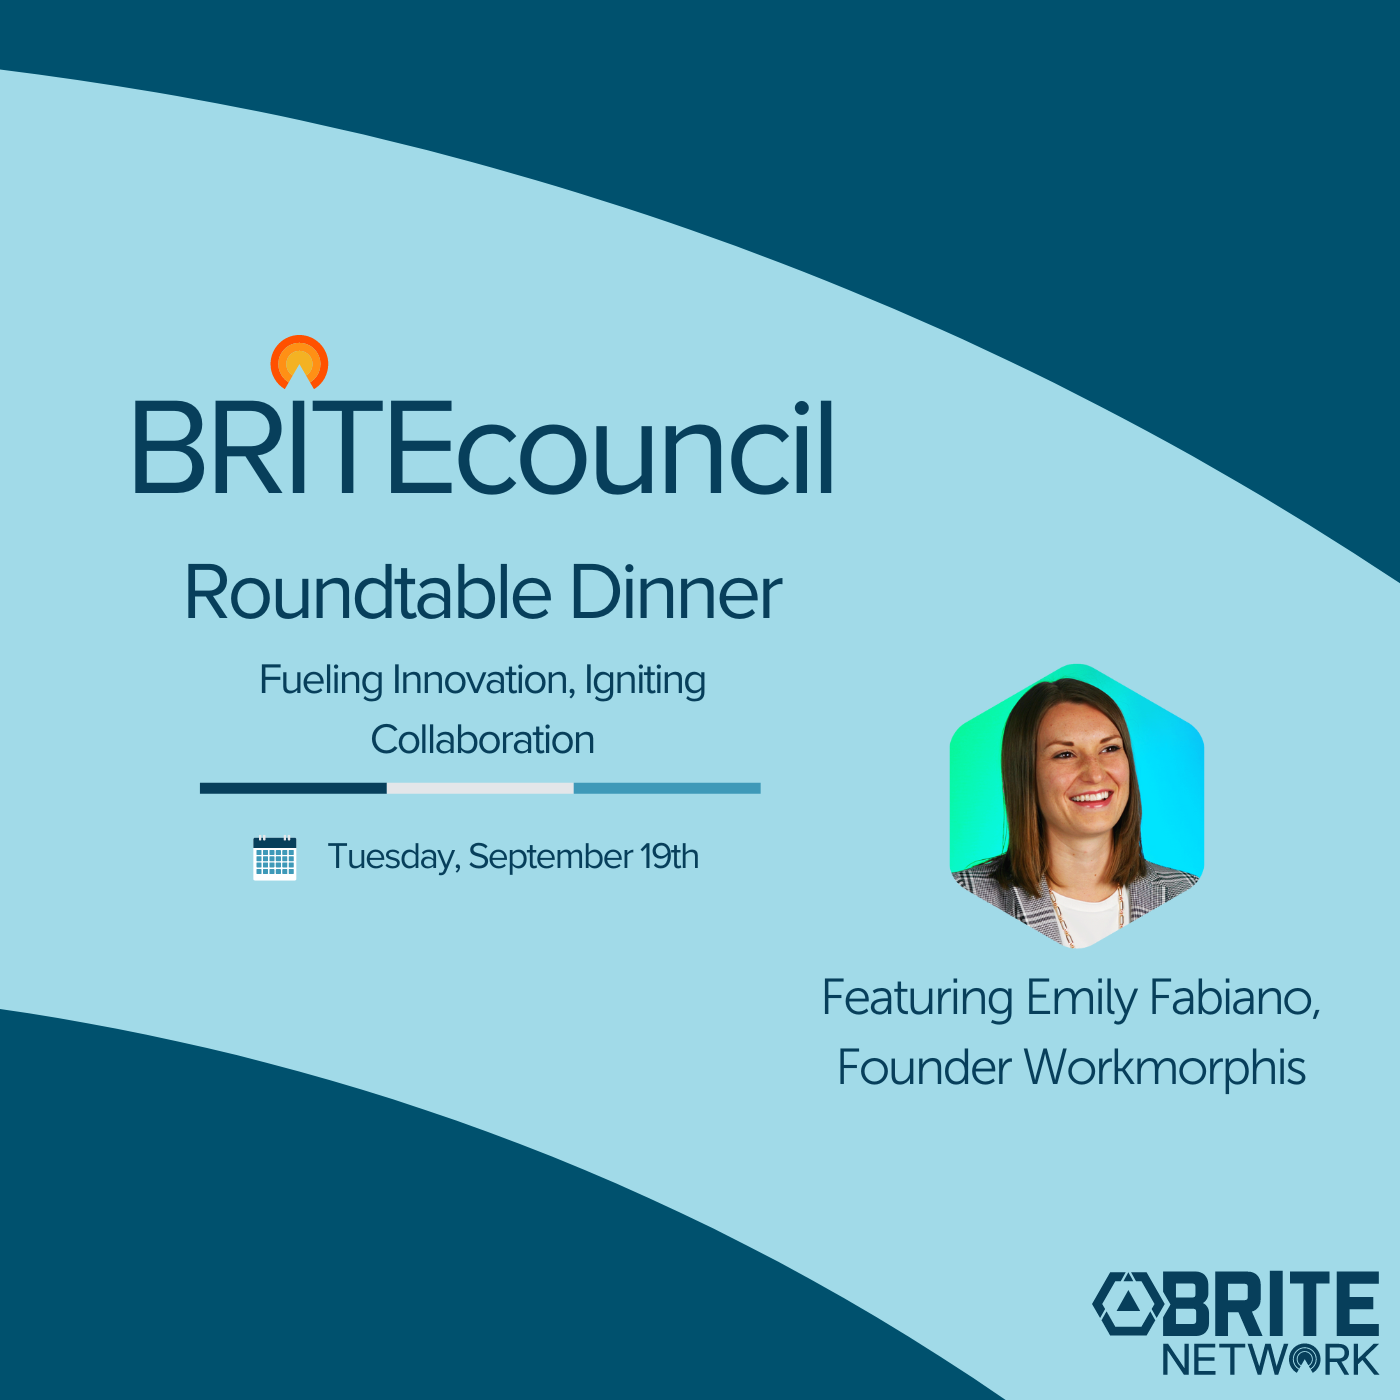 BRITEcouncil roundtable dinner, featuring Emily Fabiano, founder of Workmorphis